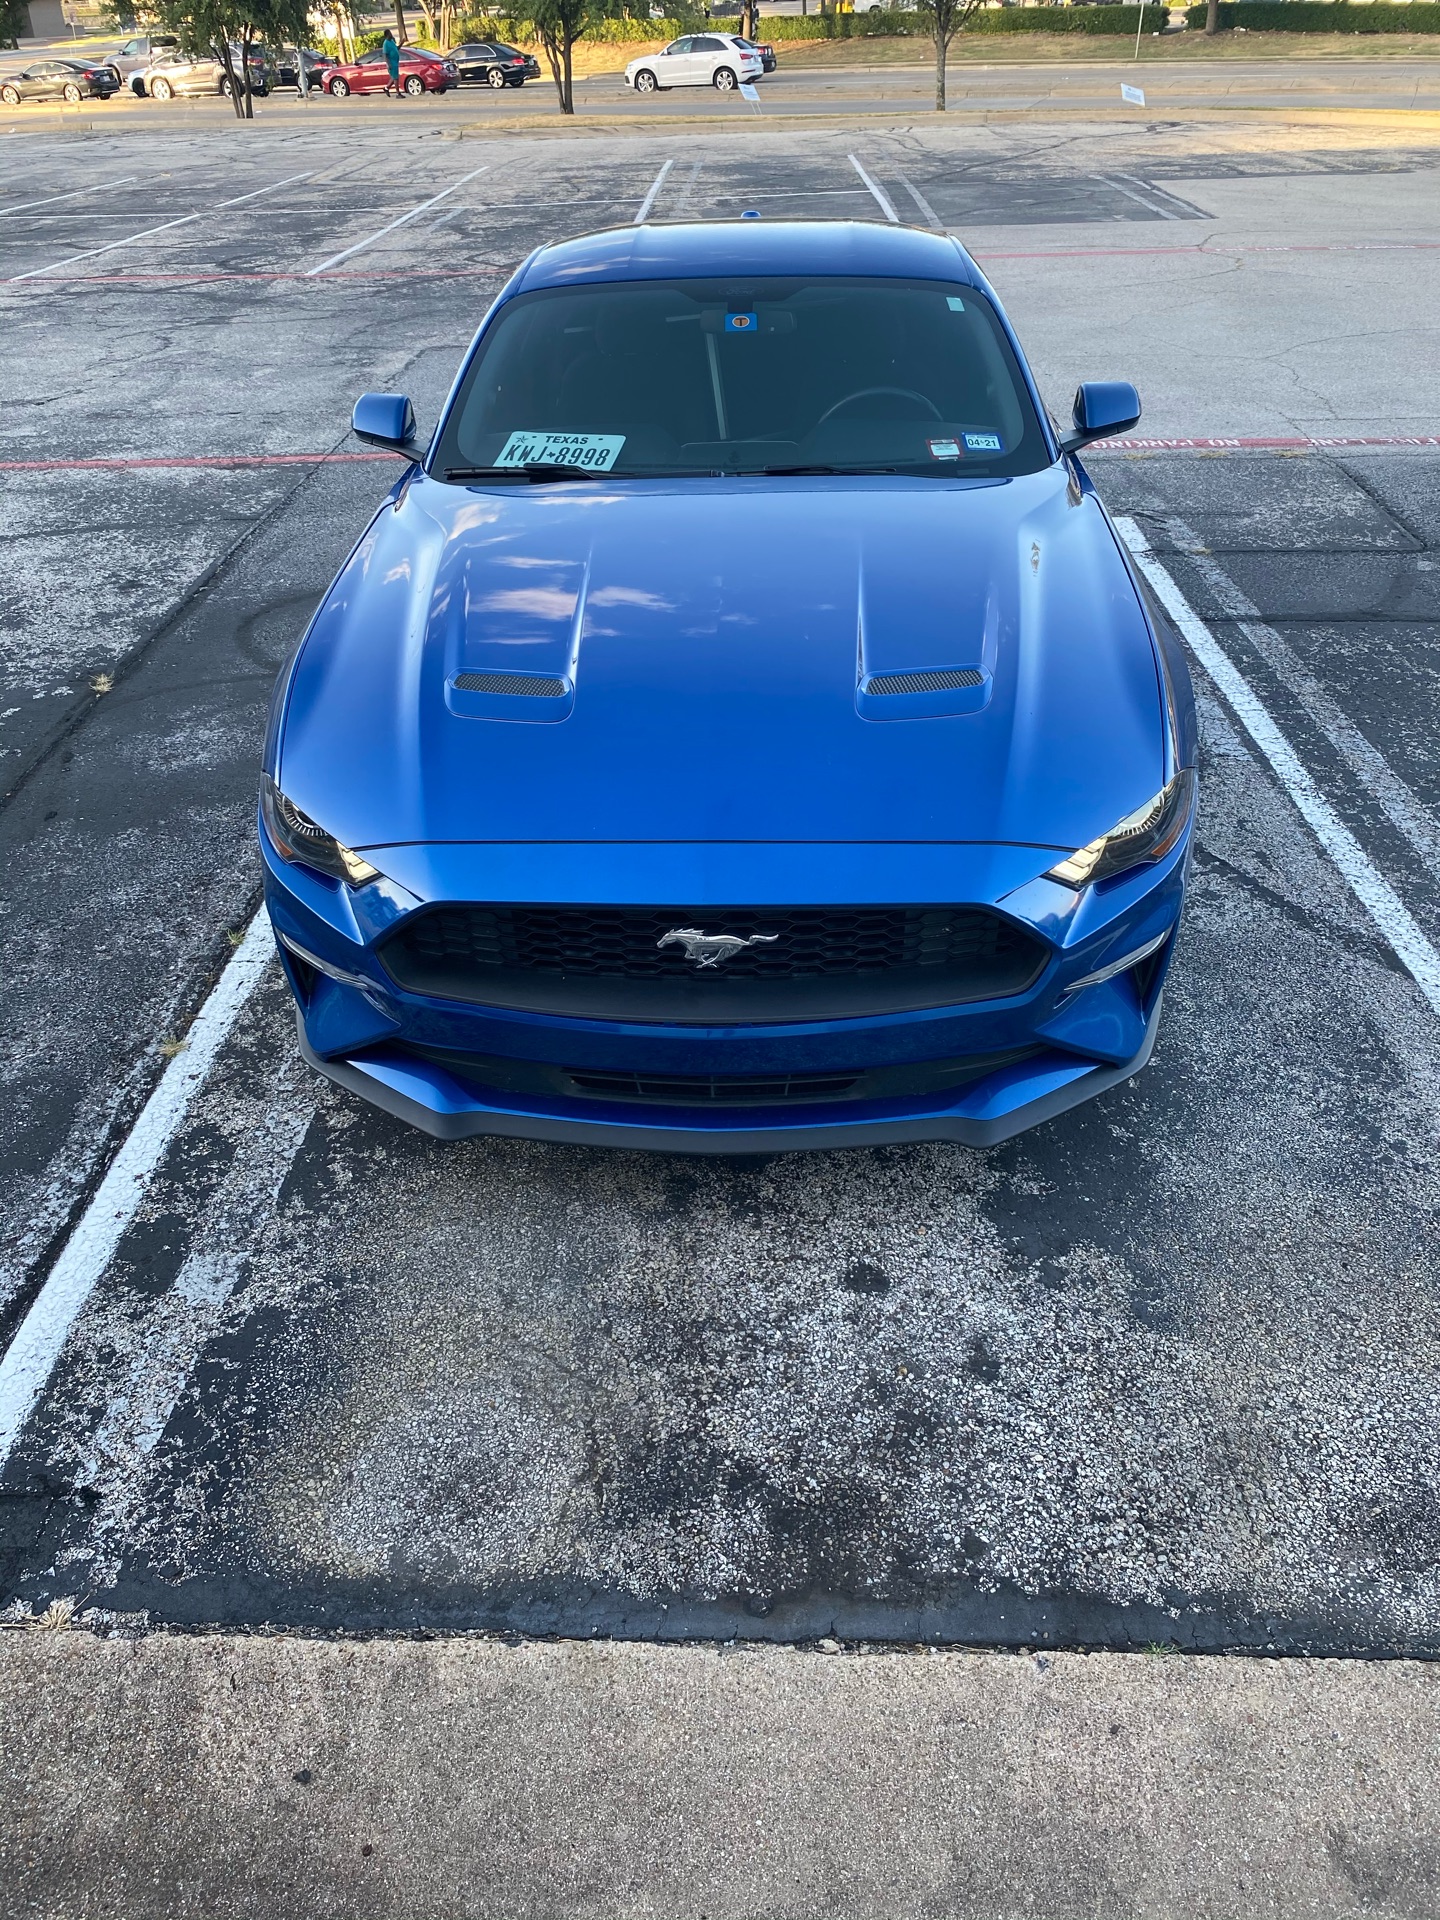 Ford Mustang 2018 Lease Deals in Dallas, Texas | Current ...